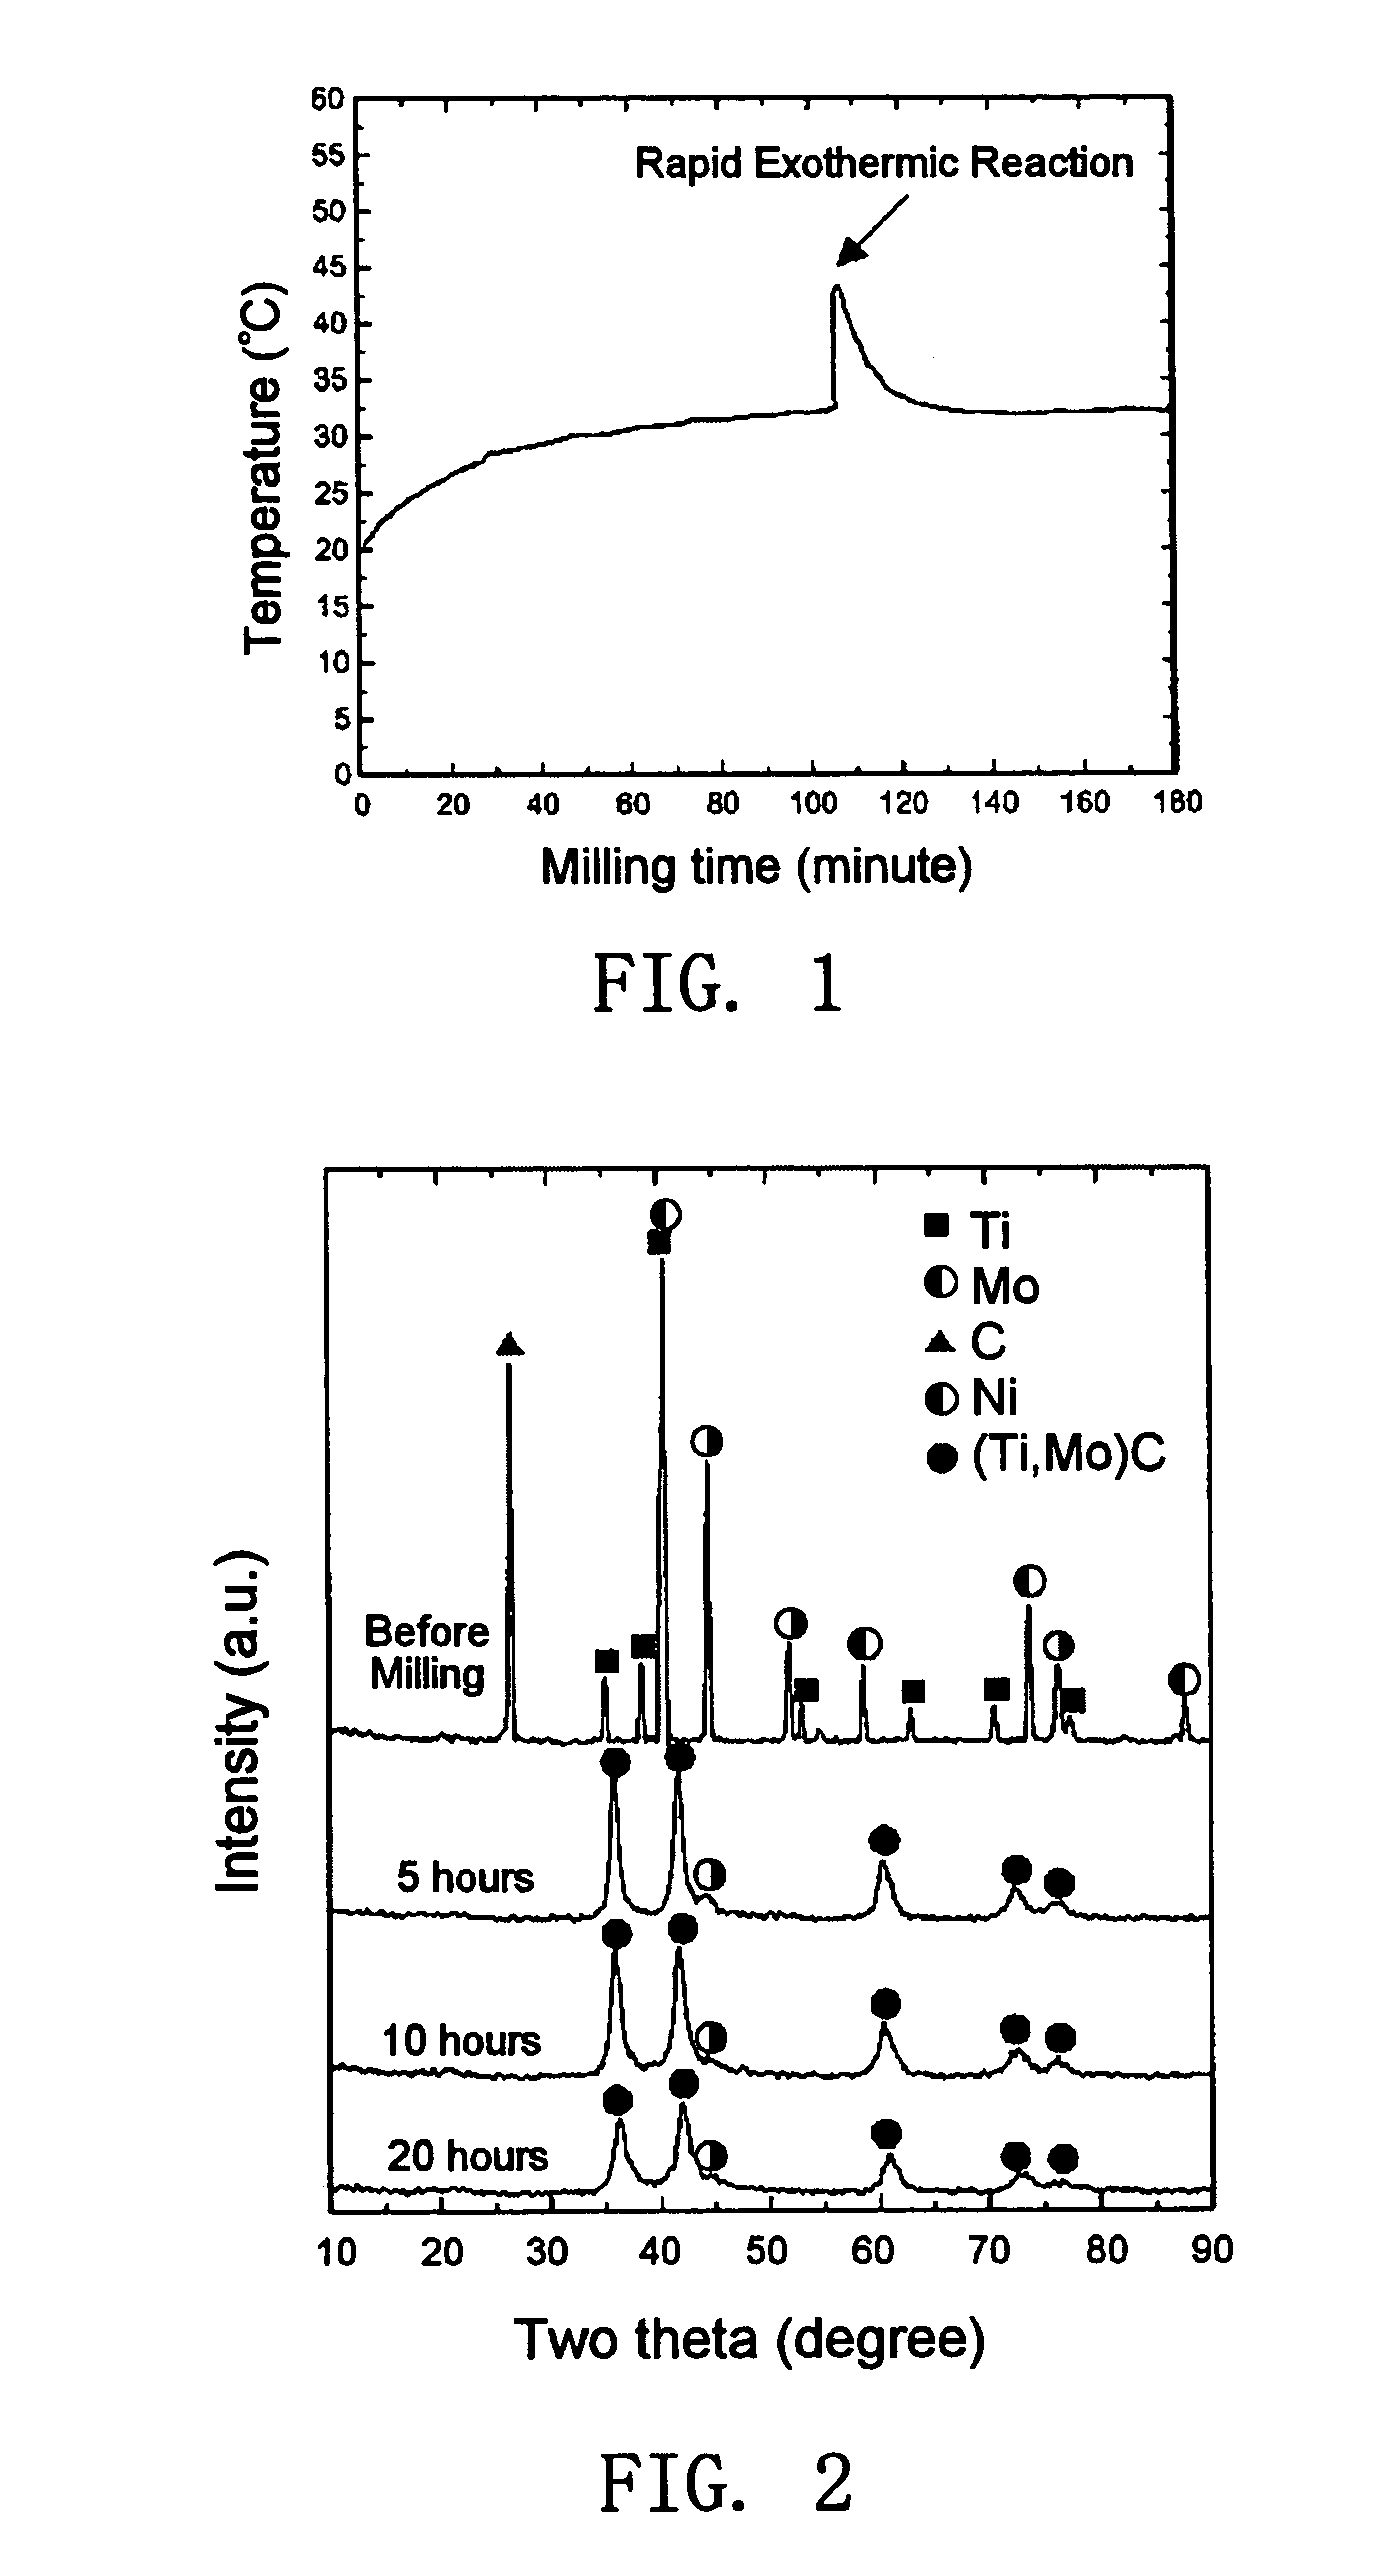 Method of fabricating ultra-fine cermet alloys with homogeneous solid grain structure